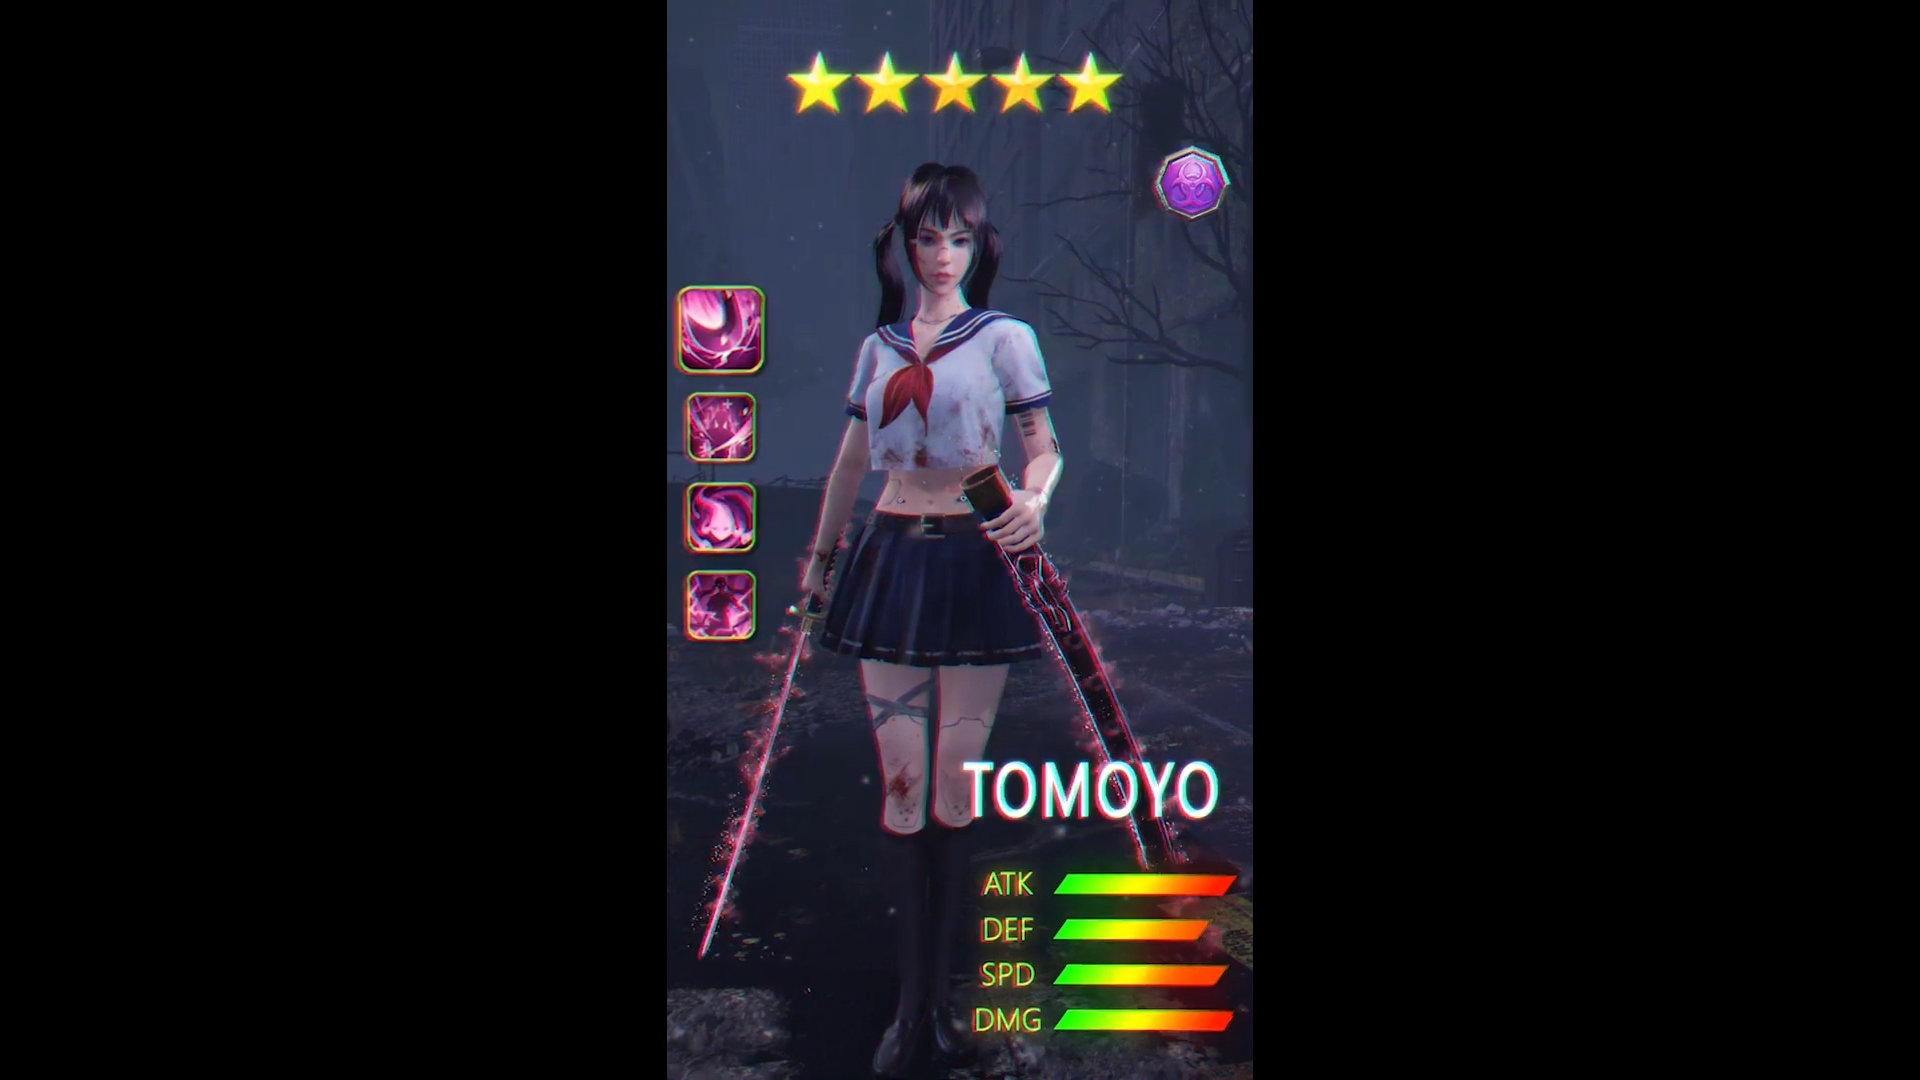 Addictive games - Puzzles and Survival, a screenshot shows a summary of the character Tomoyo, summarising her ATK, DEF, SPD, and DMG stats.